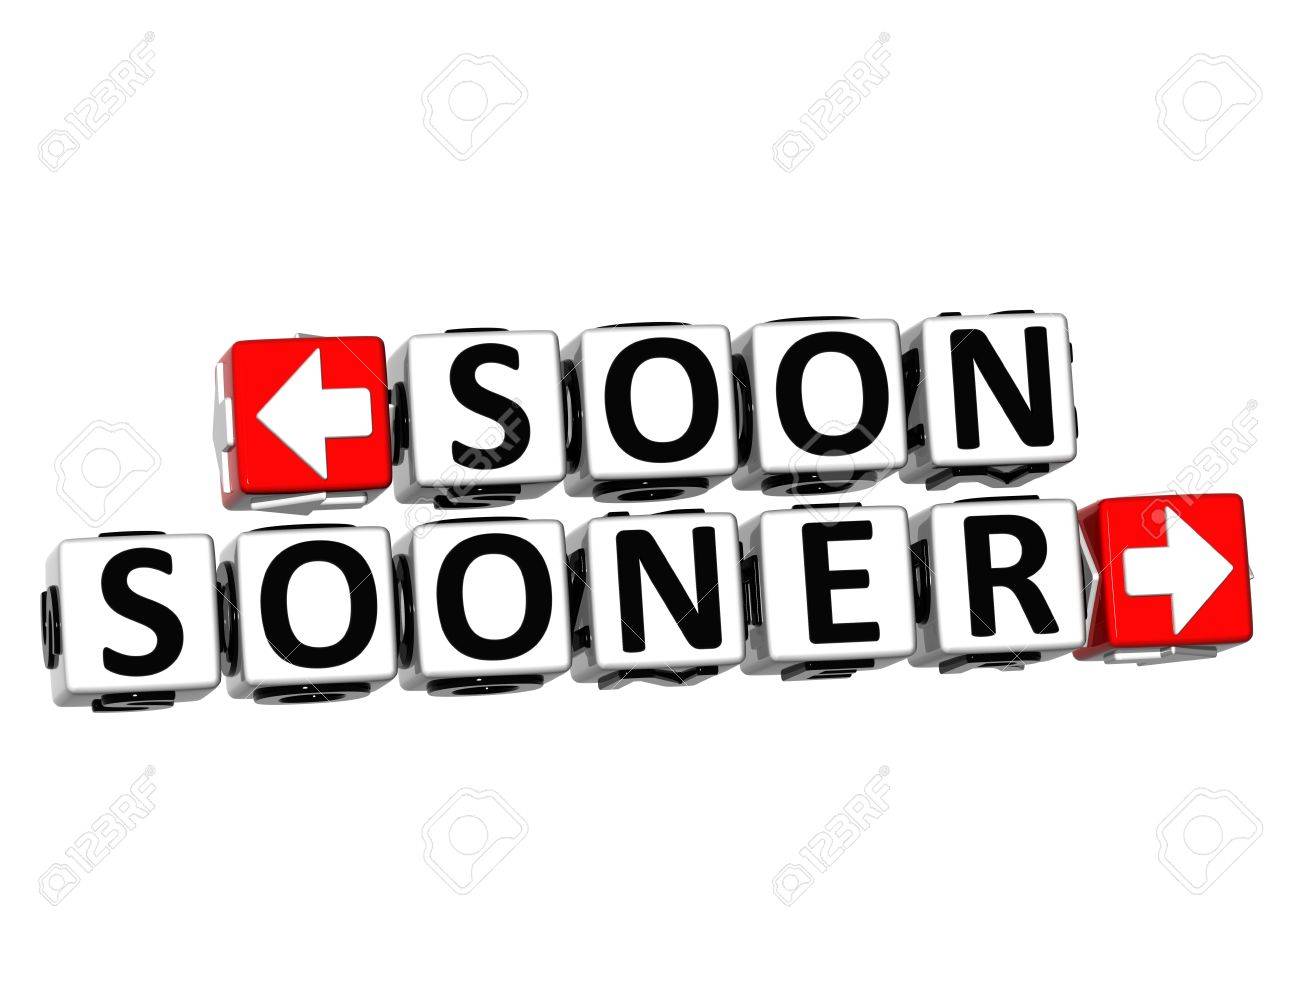 3d Soon Sooner Button Click Here Block Text Over White Background